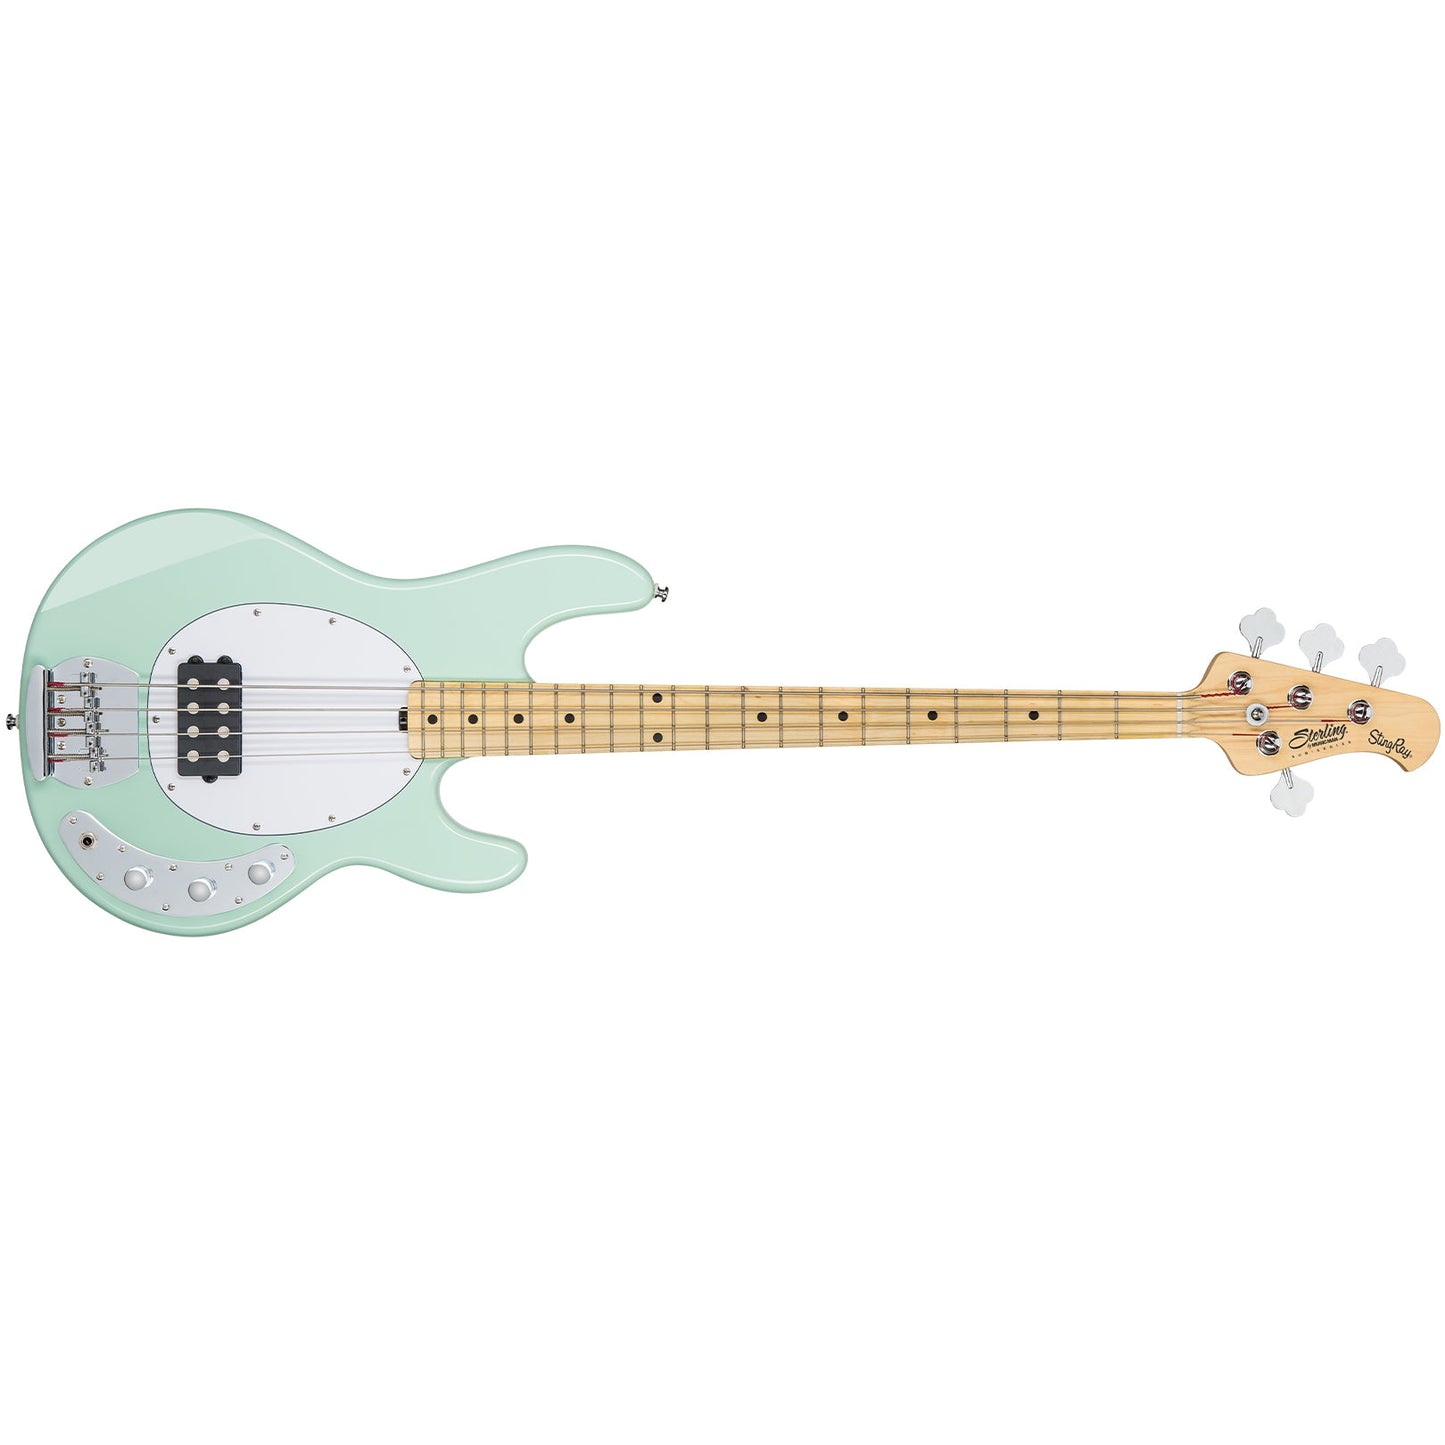 Sterling by Music Man StingRay 4 - Mint Green - Maple FB